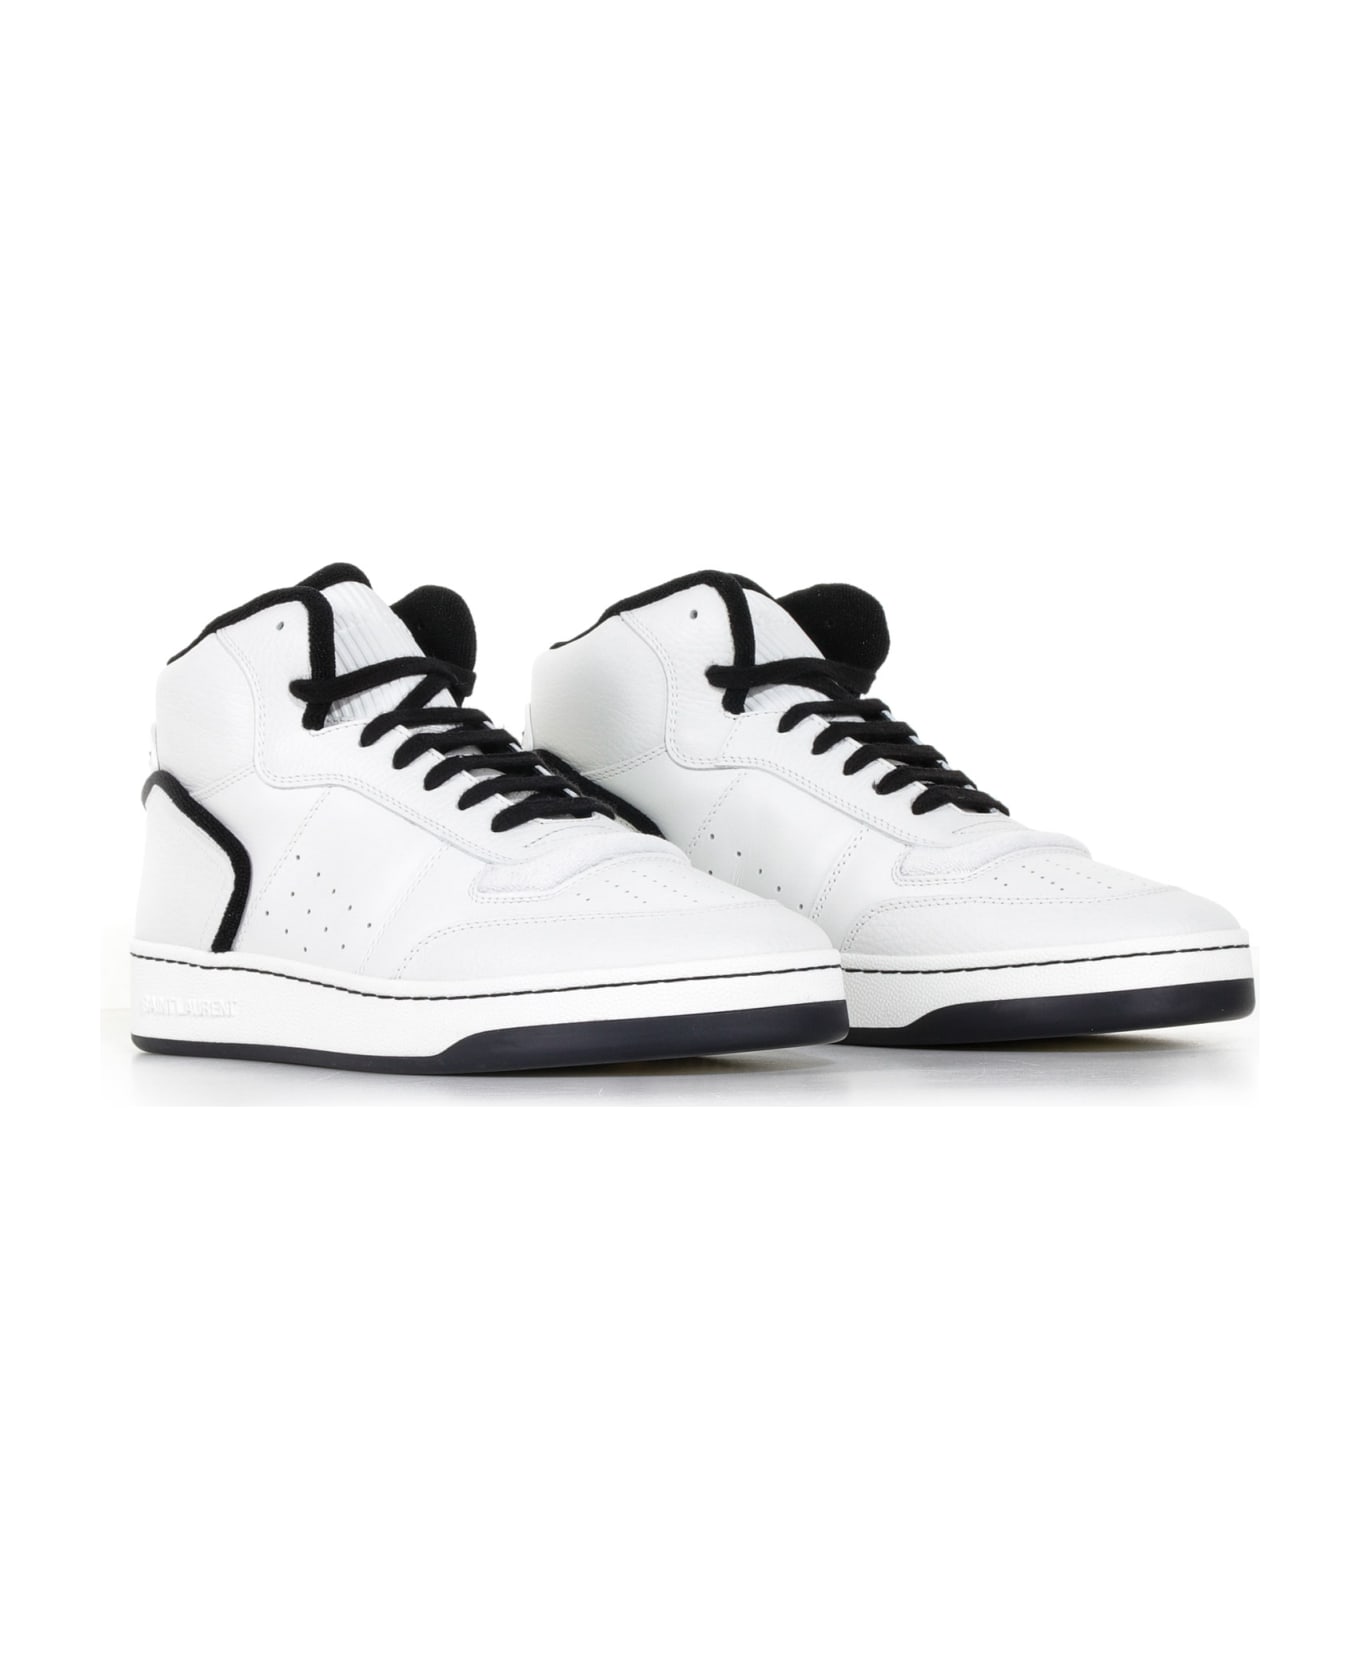 Saint Laurent Sneakers With Contrasting Details - BLANC OPT